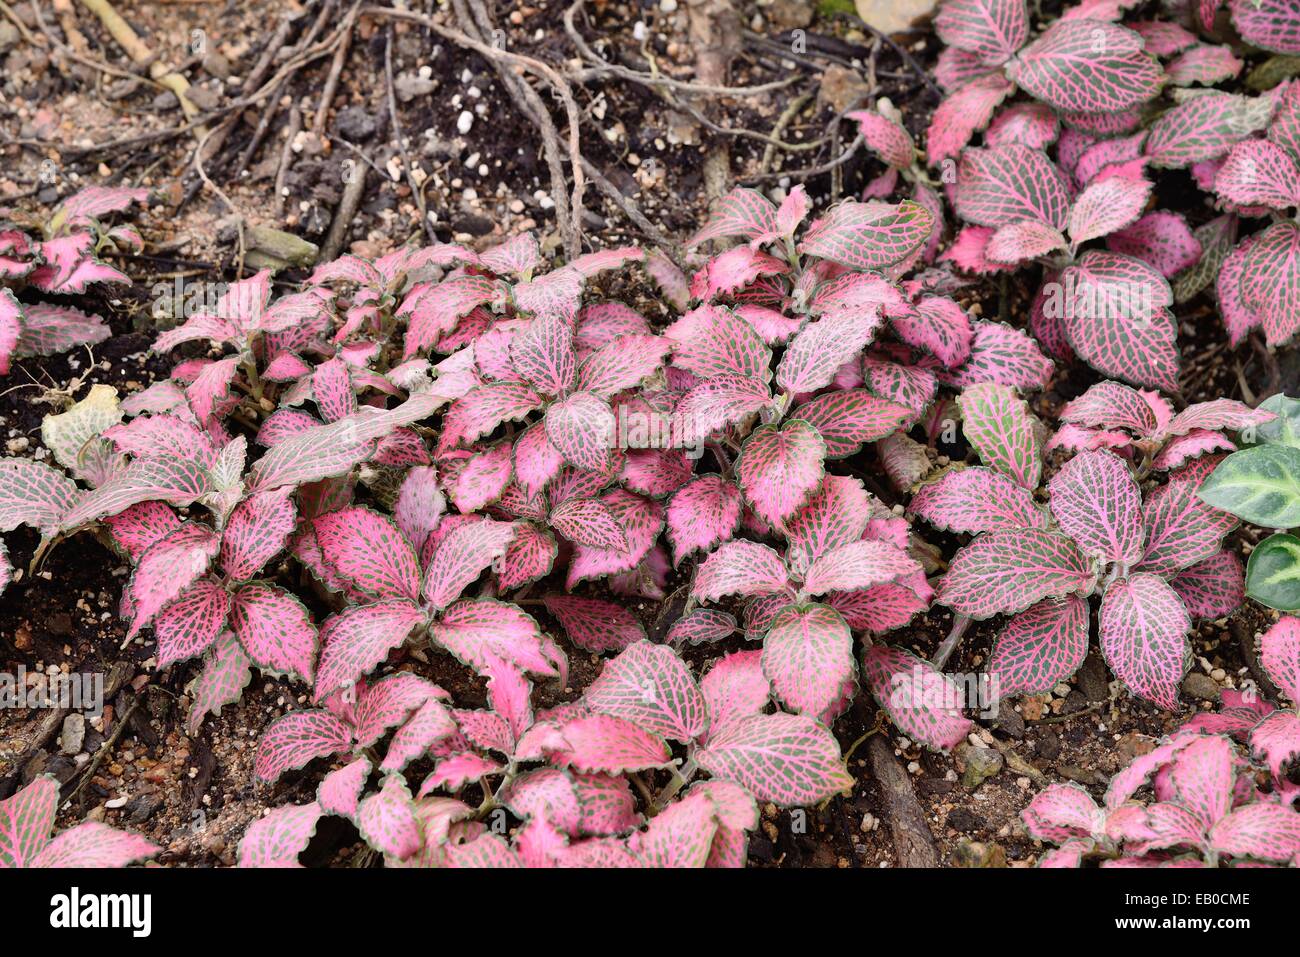 a colony of red colored fitonia in a garden Stock Photo